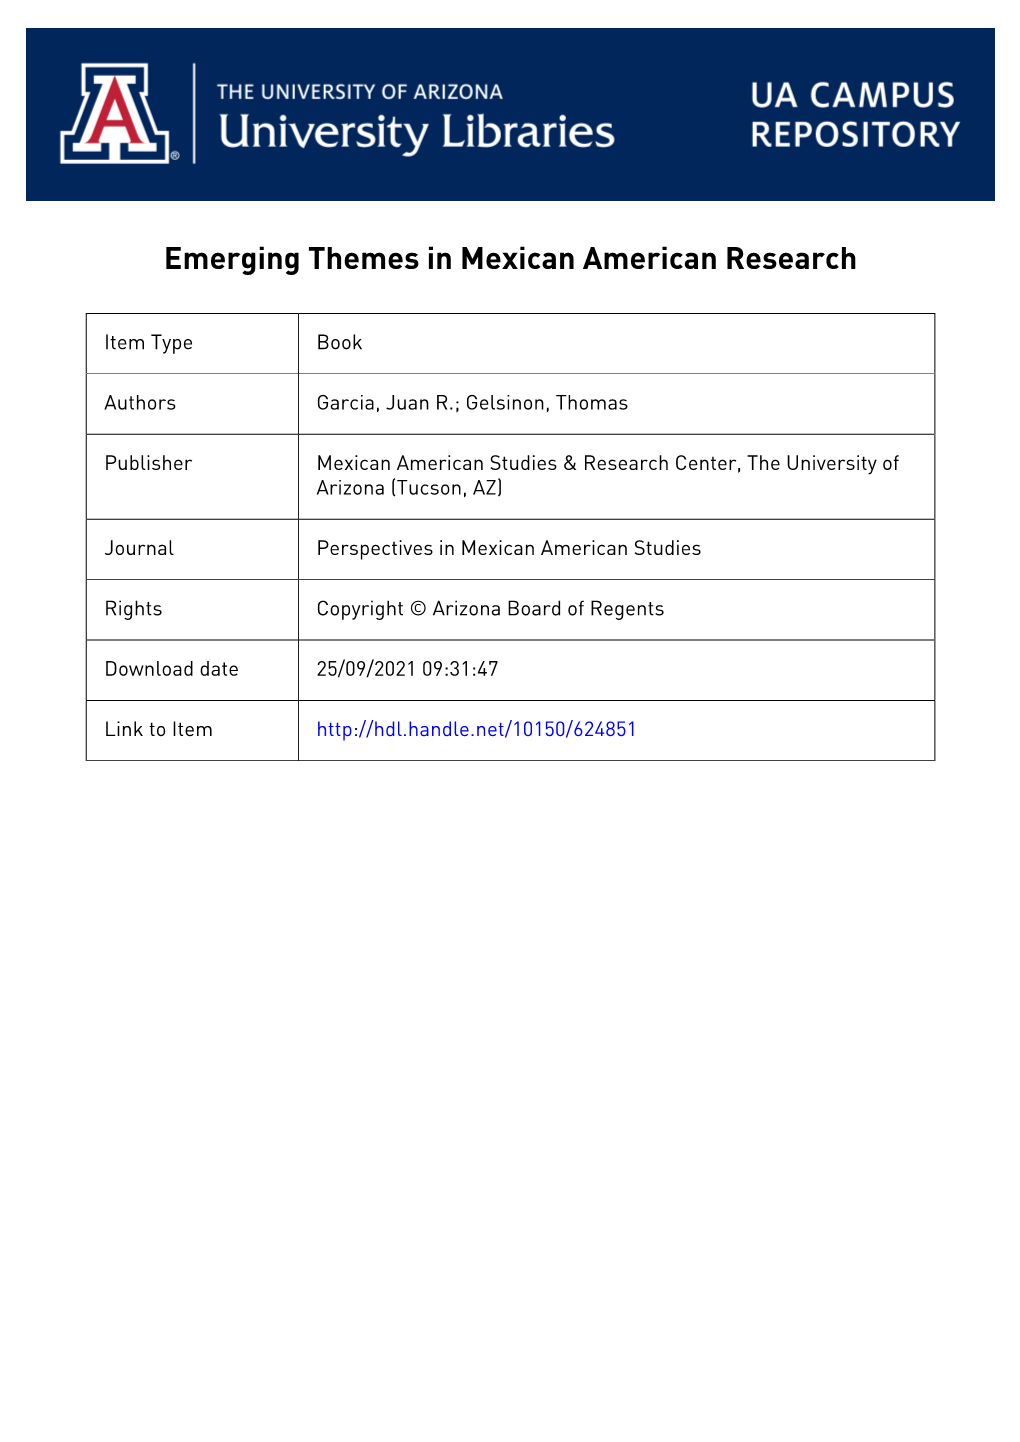 EMERGING THEMES MEXICAN AMERICAN RESEARCH Perspectives in Mexican American Studies Is an Ongoing Series Devoted to Chicano /A Research